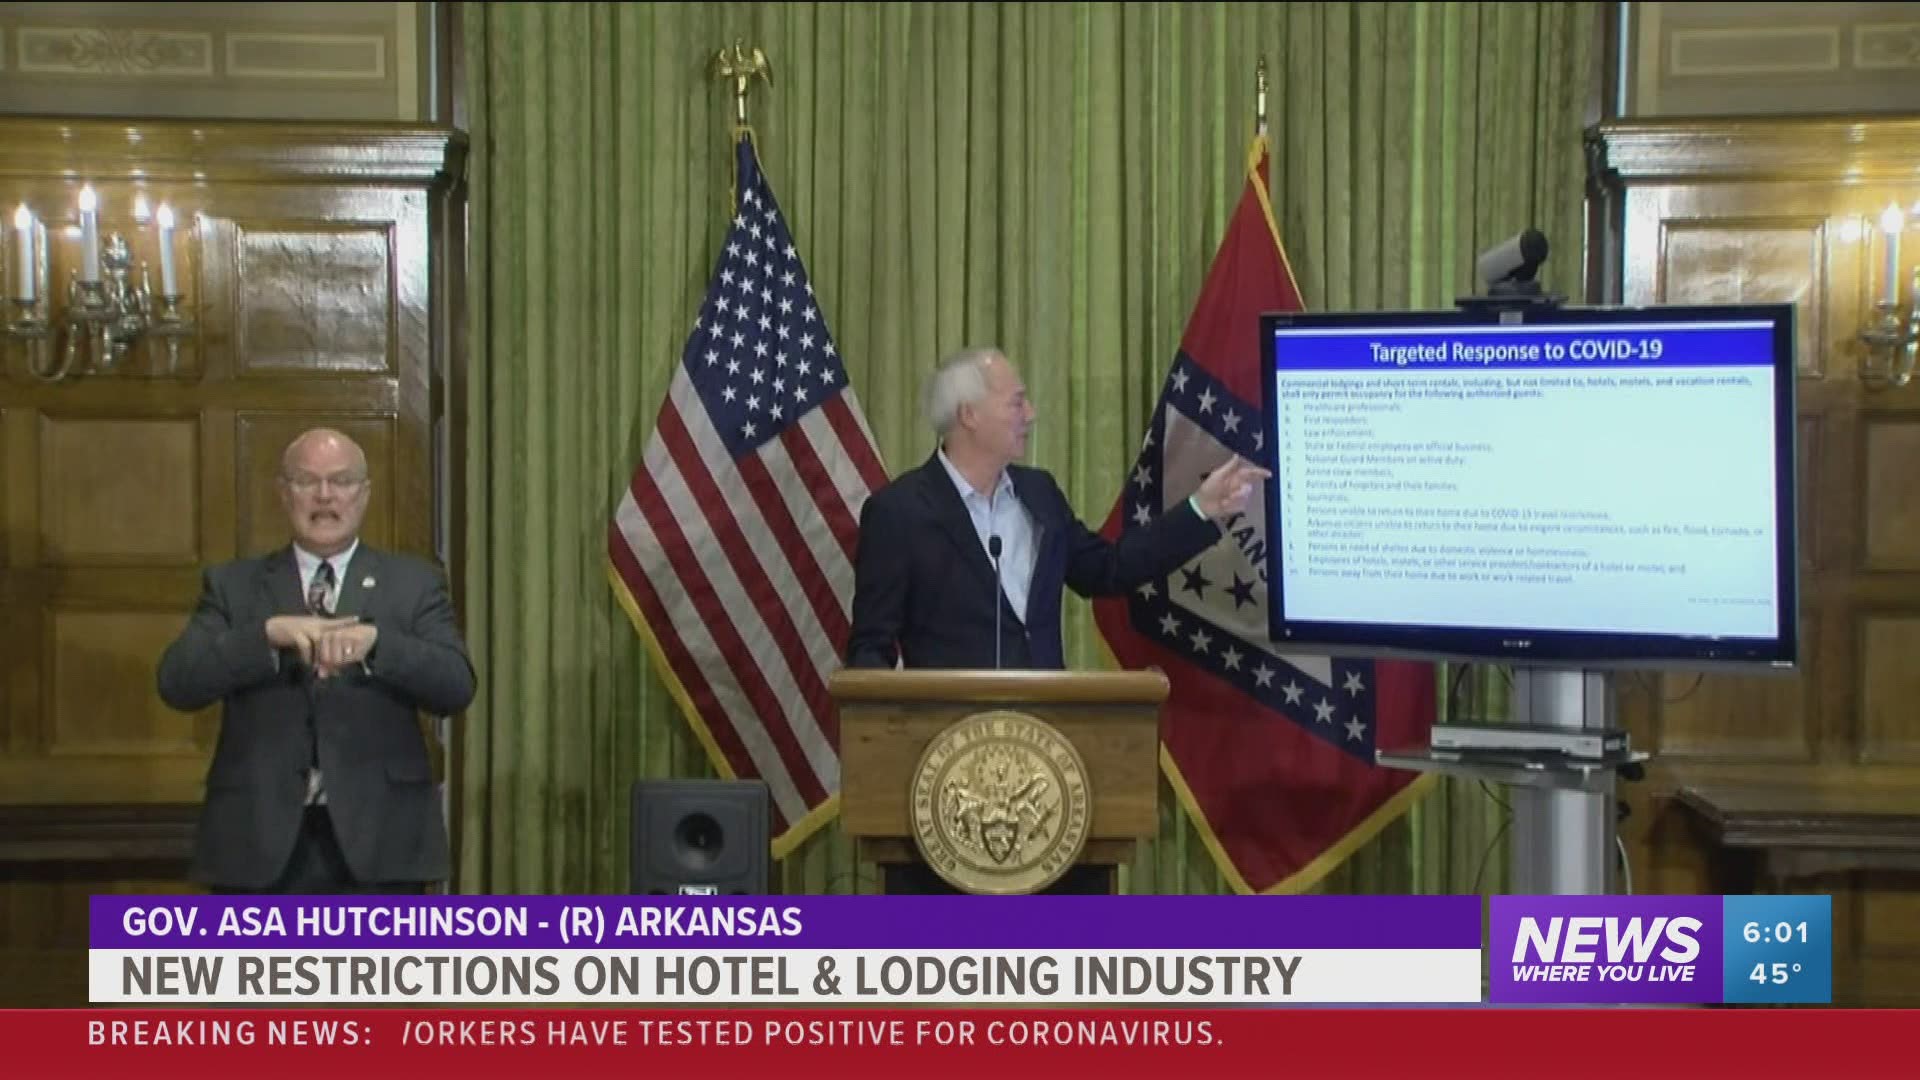 New restrictions on hotel & lodging industry